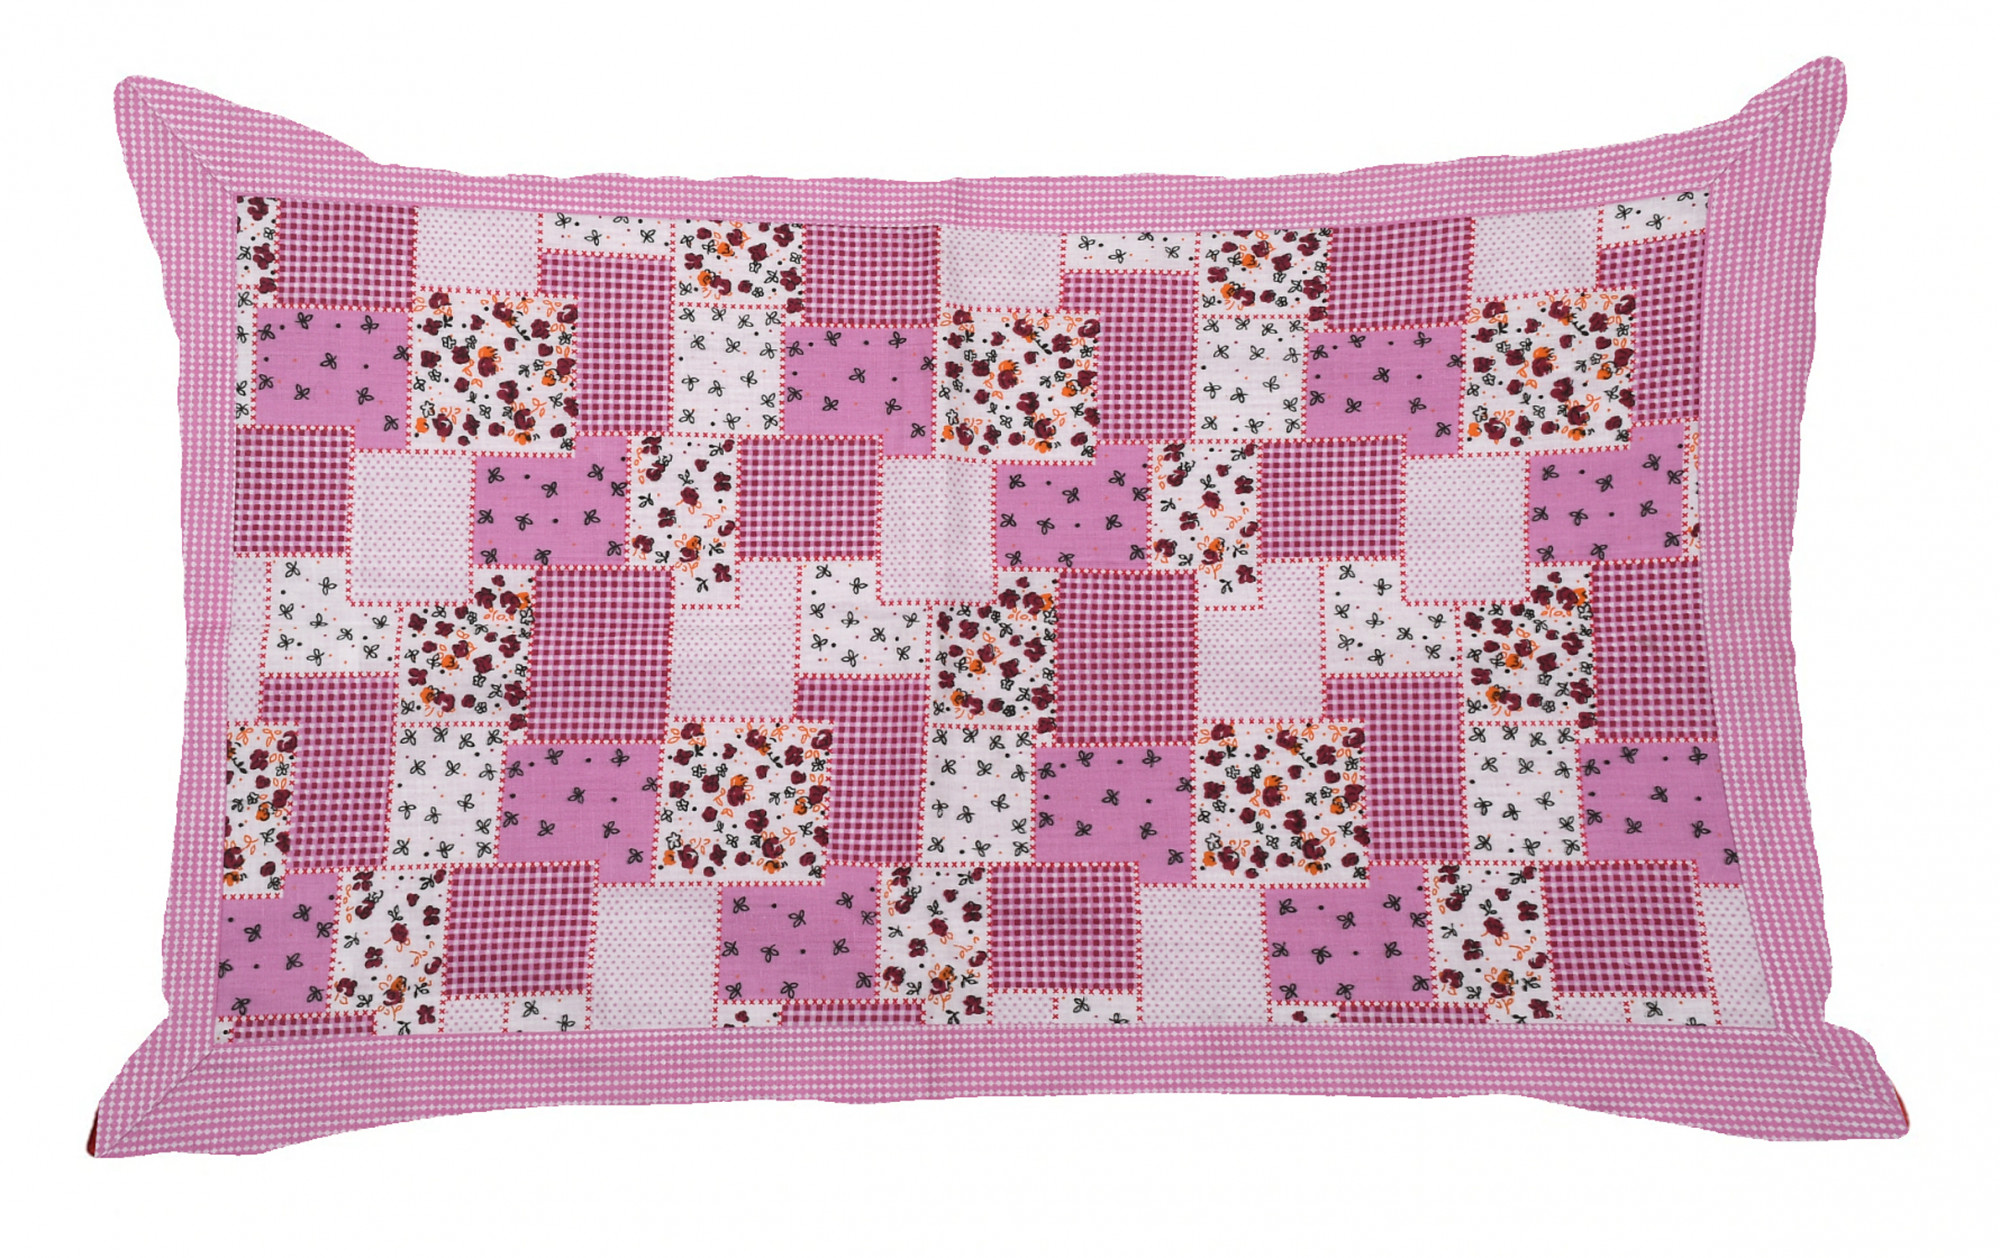 Kuber Industries Check Design Premium Cotton Pillow Covers, 18 x 28 inch,(Pink)